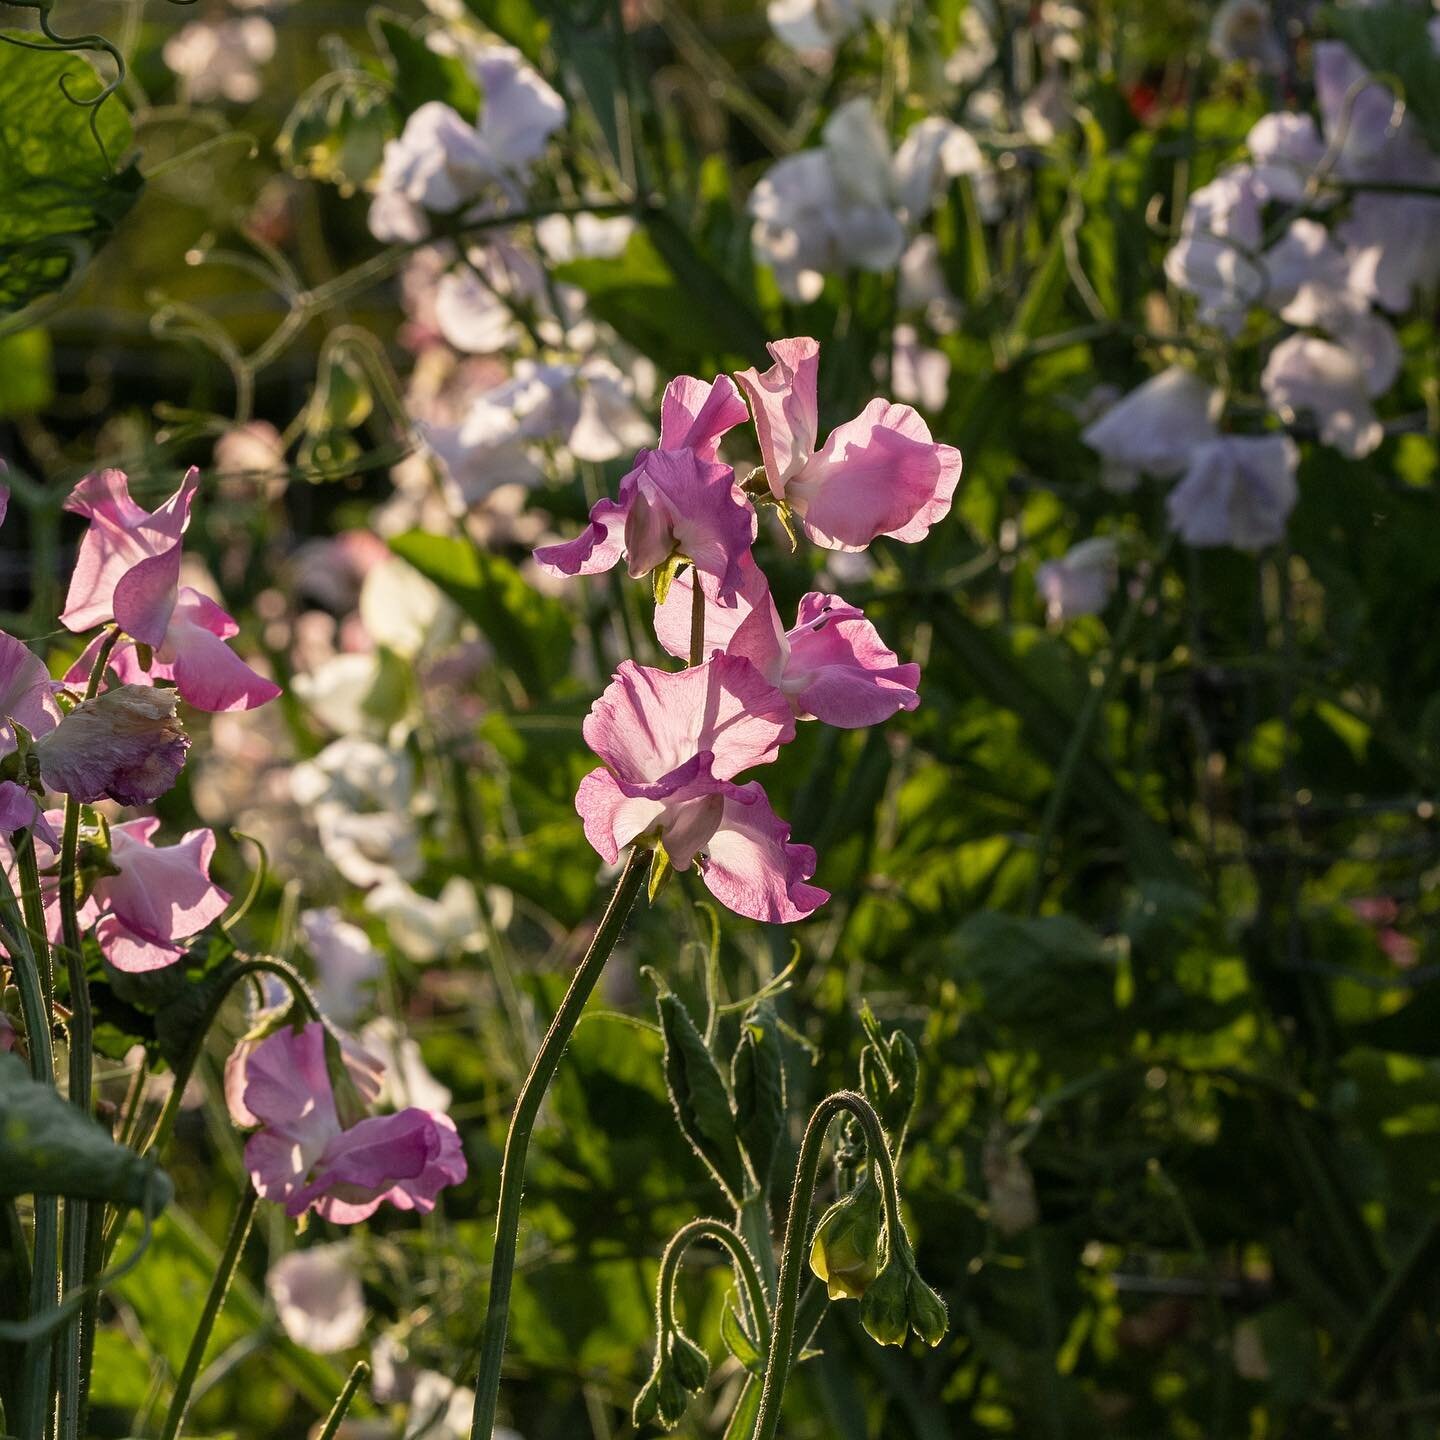 Sweet Pea Season has started at Easton Walled Gardens and our favourite flowers are looking and smelling gorgeous as ever. The weather is being kind, the cakes are tasty, the coffee flowing and the welcome warm.
The Gardens are open Wednesdays to Sun